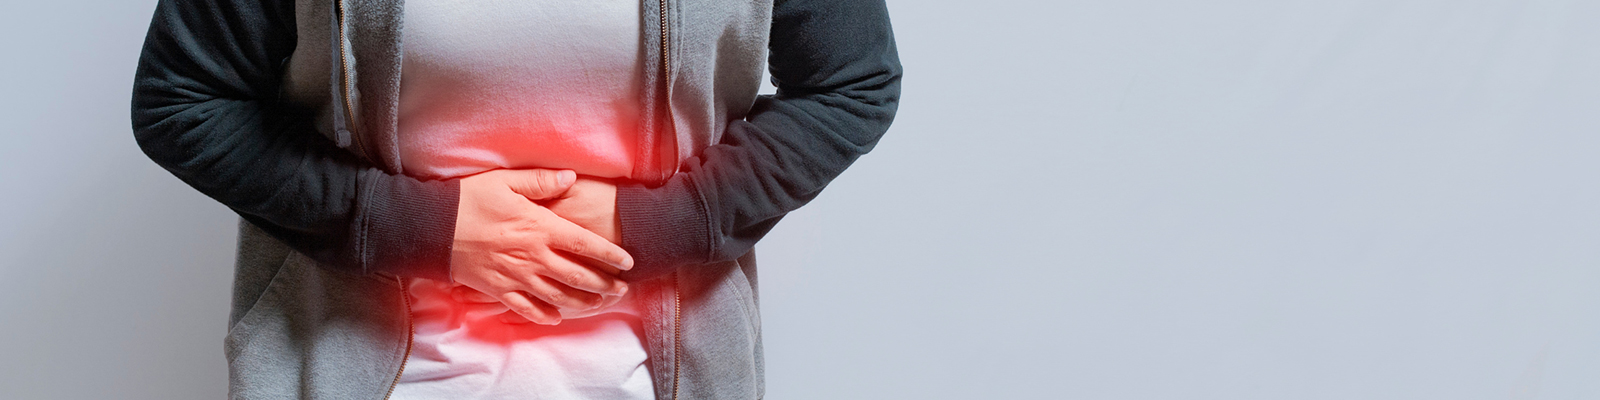 7 Signs That You Have Gastric Problems